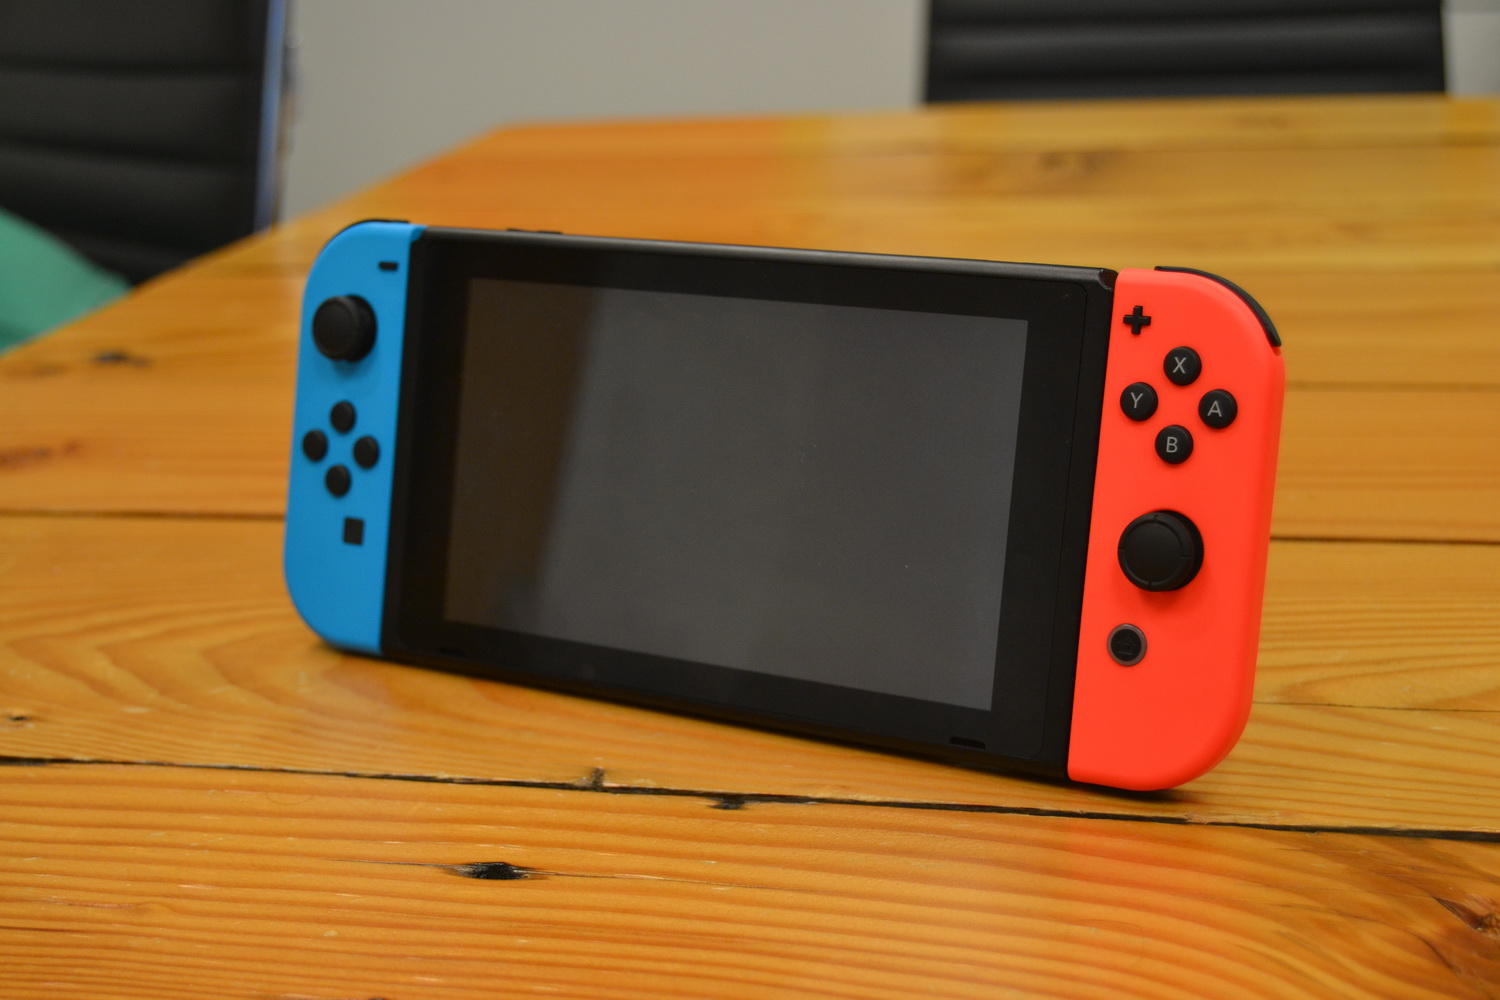 Nintendo reportedly plans to release upgraded Switch console in 2021